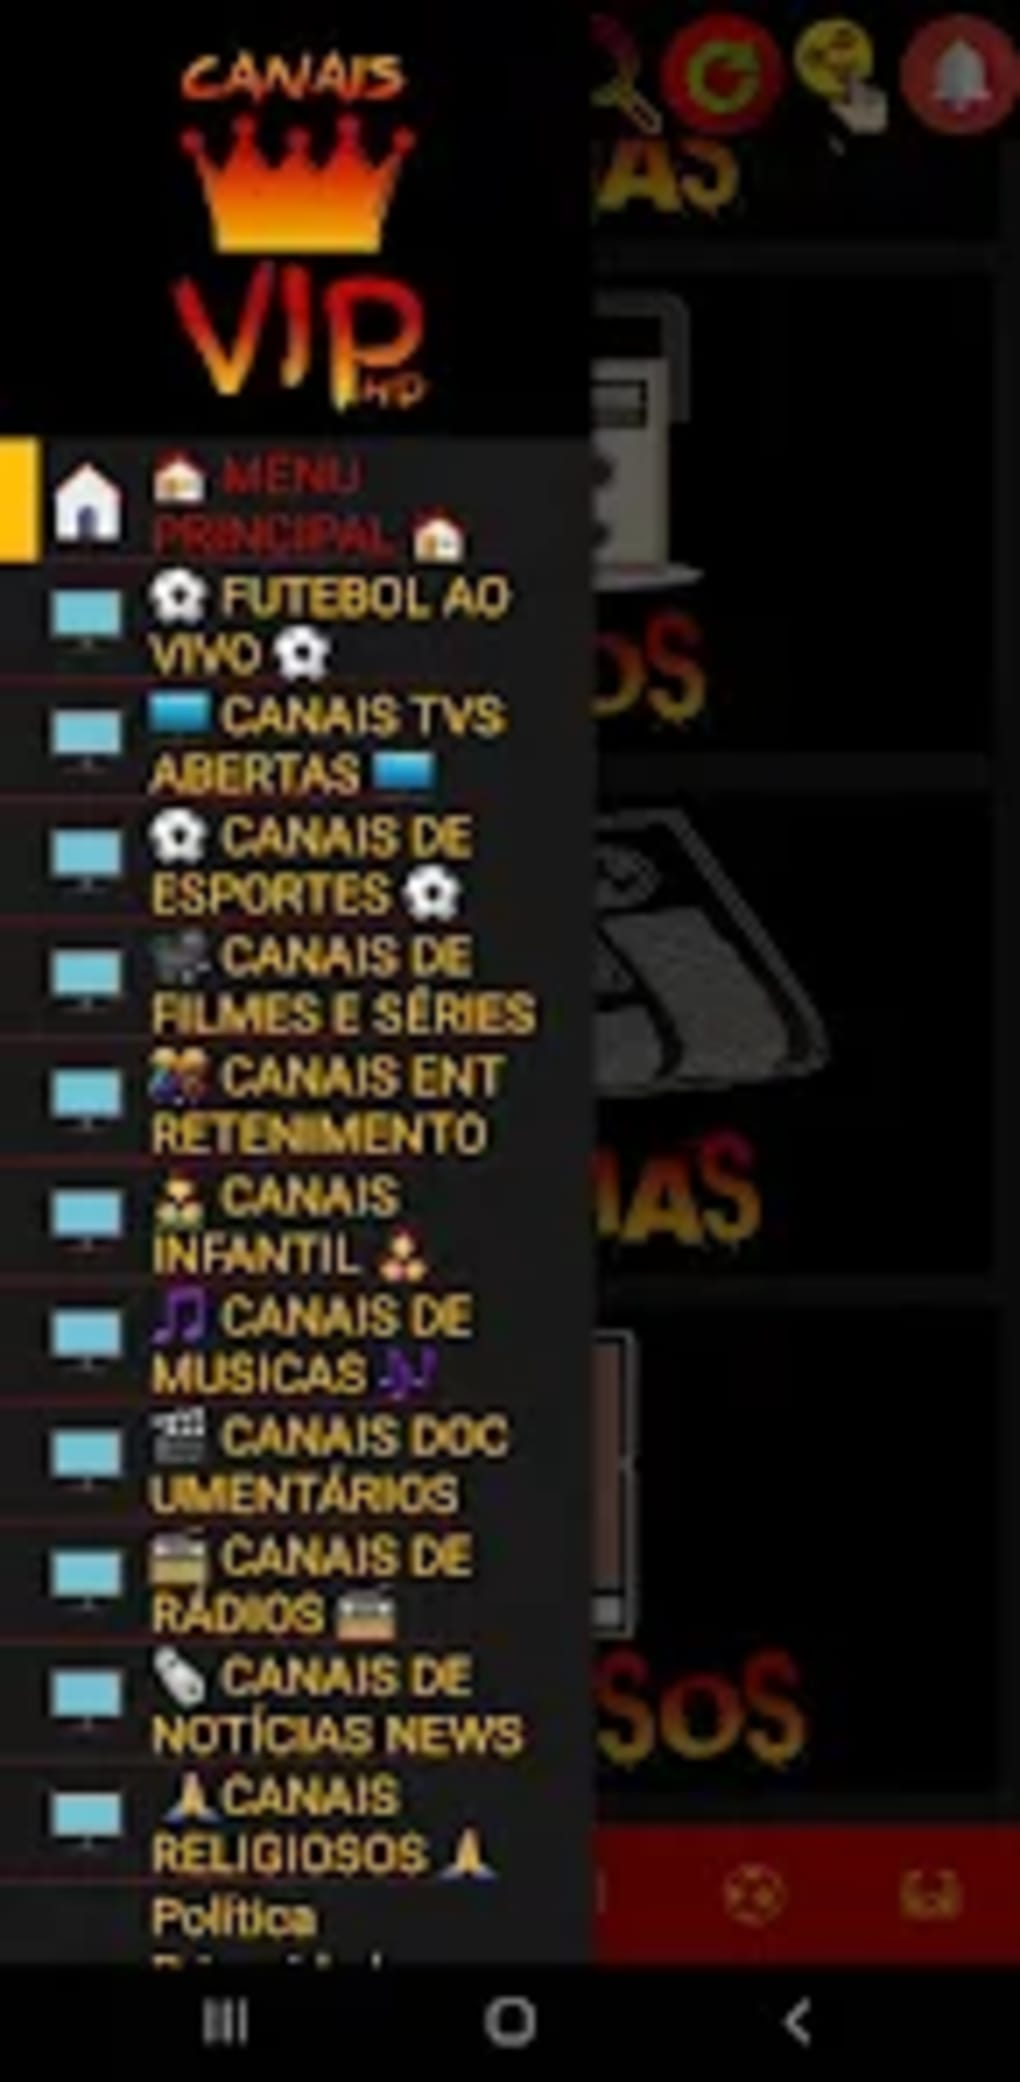 Canais VIP HD - Tv online for Android - Download